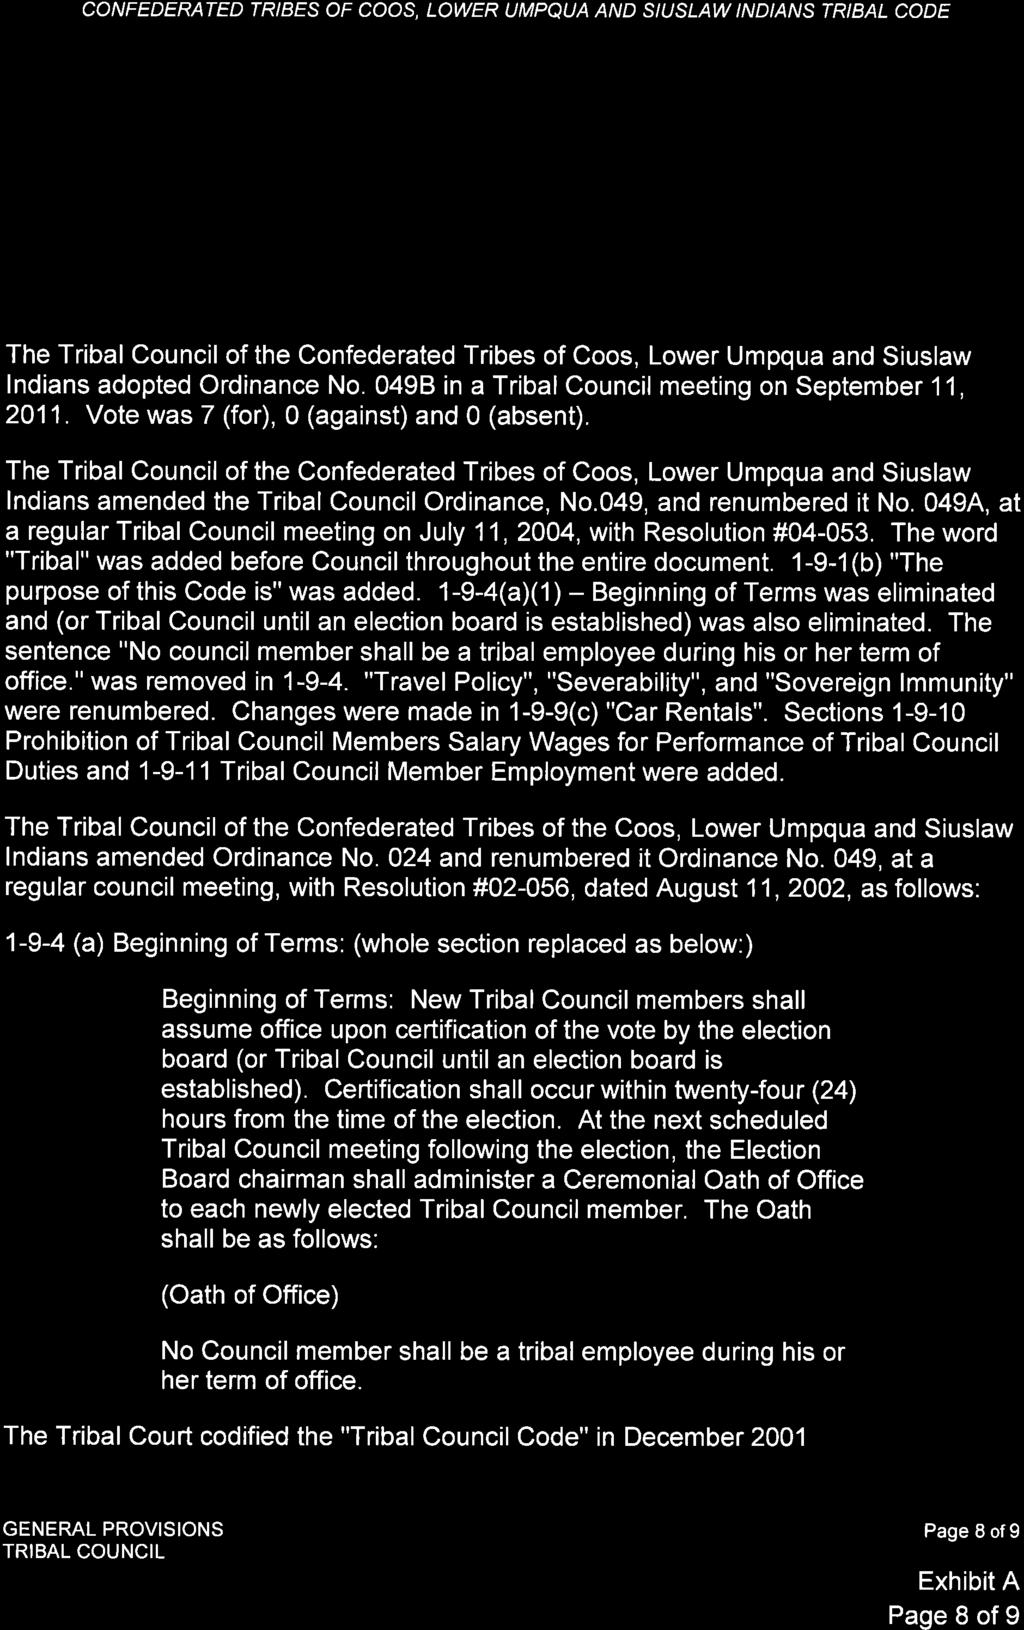 CONFEDERATED TRIBES OF COOS, LOWER UMPQUA AND SIUSLAW INDIANS TRIBAL CODE LEGISLATIVE HISTORY AND EDITORIAL CHANGES The Tribal Council of the Confederated T lndians enacted the revisions to Code 1-9